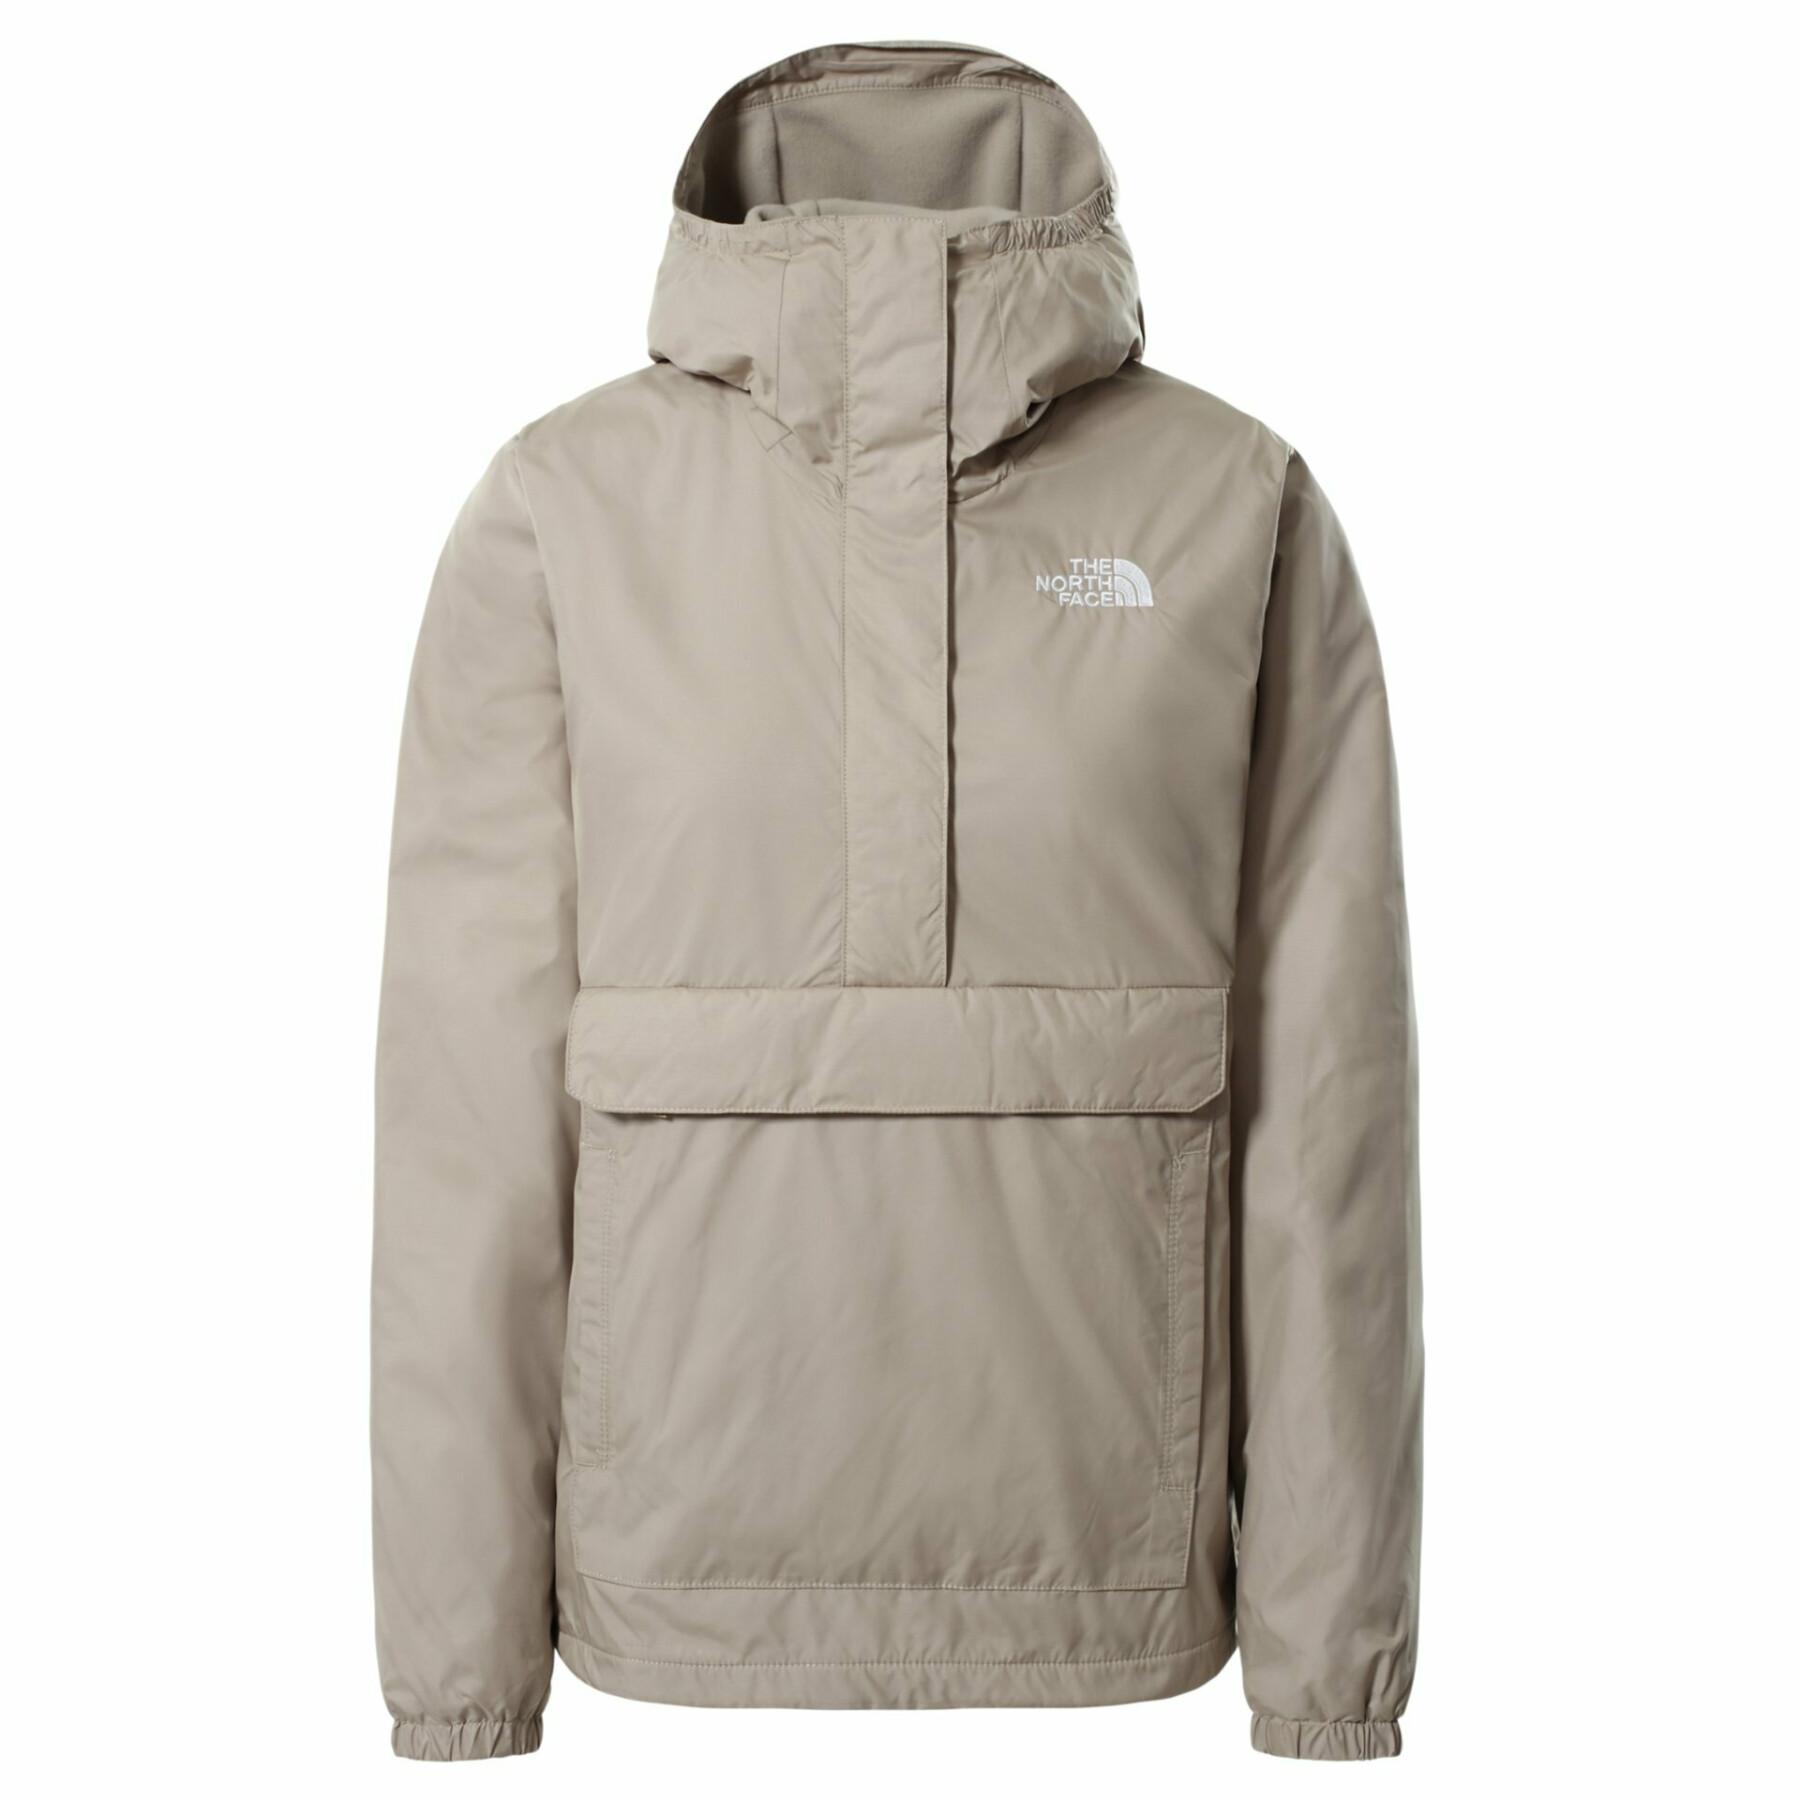 Anorak woman The North Face Insulated